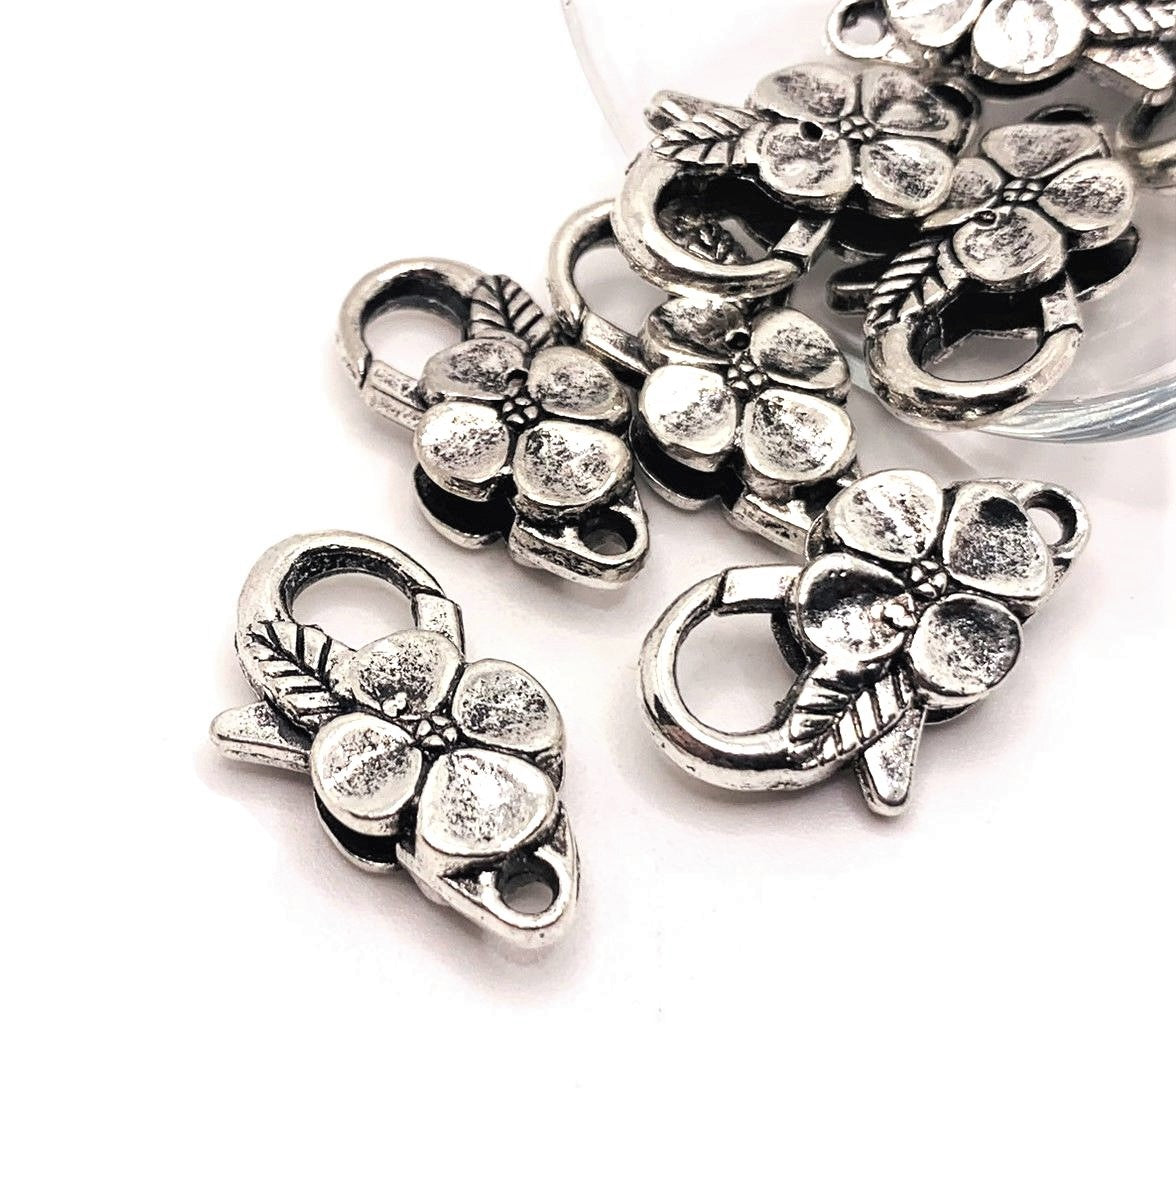 4, 20 or 50 Pieces: Large Silver Flower Lobster Clasps - Double Sided